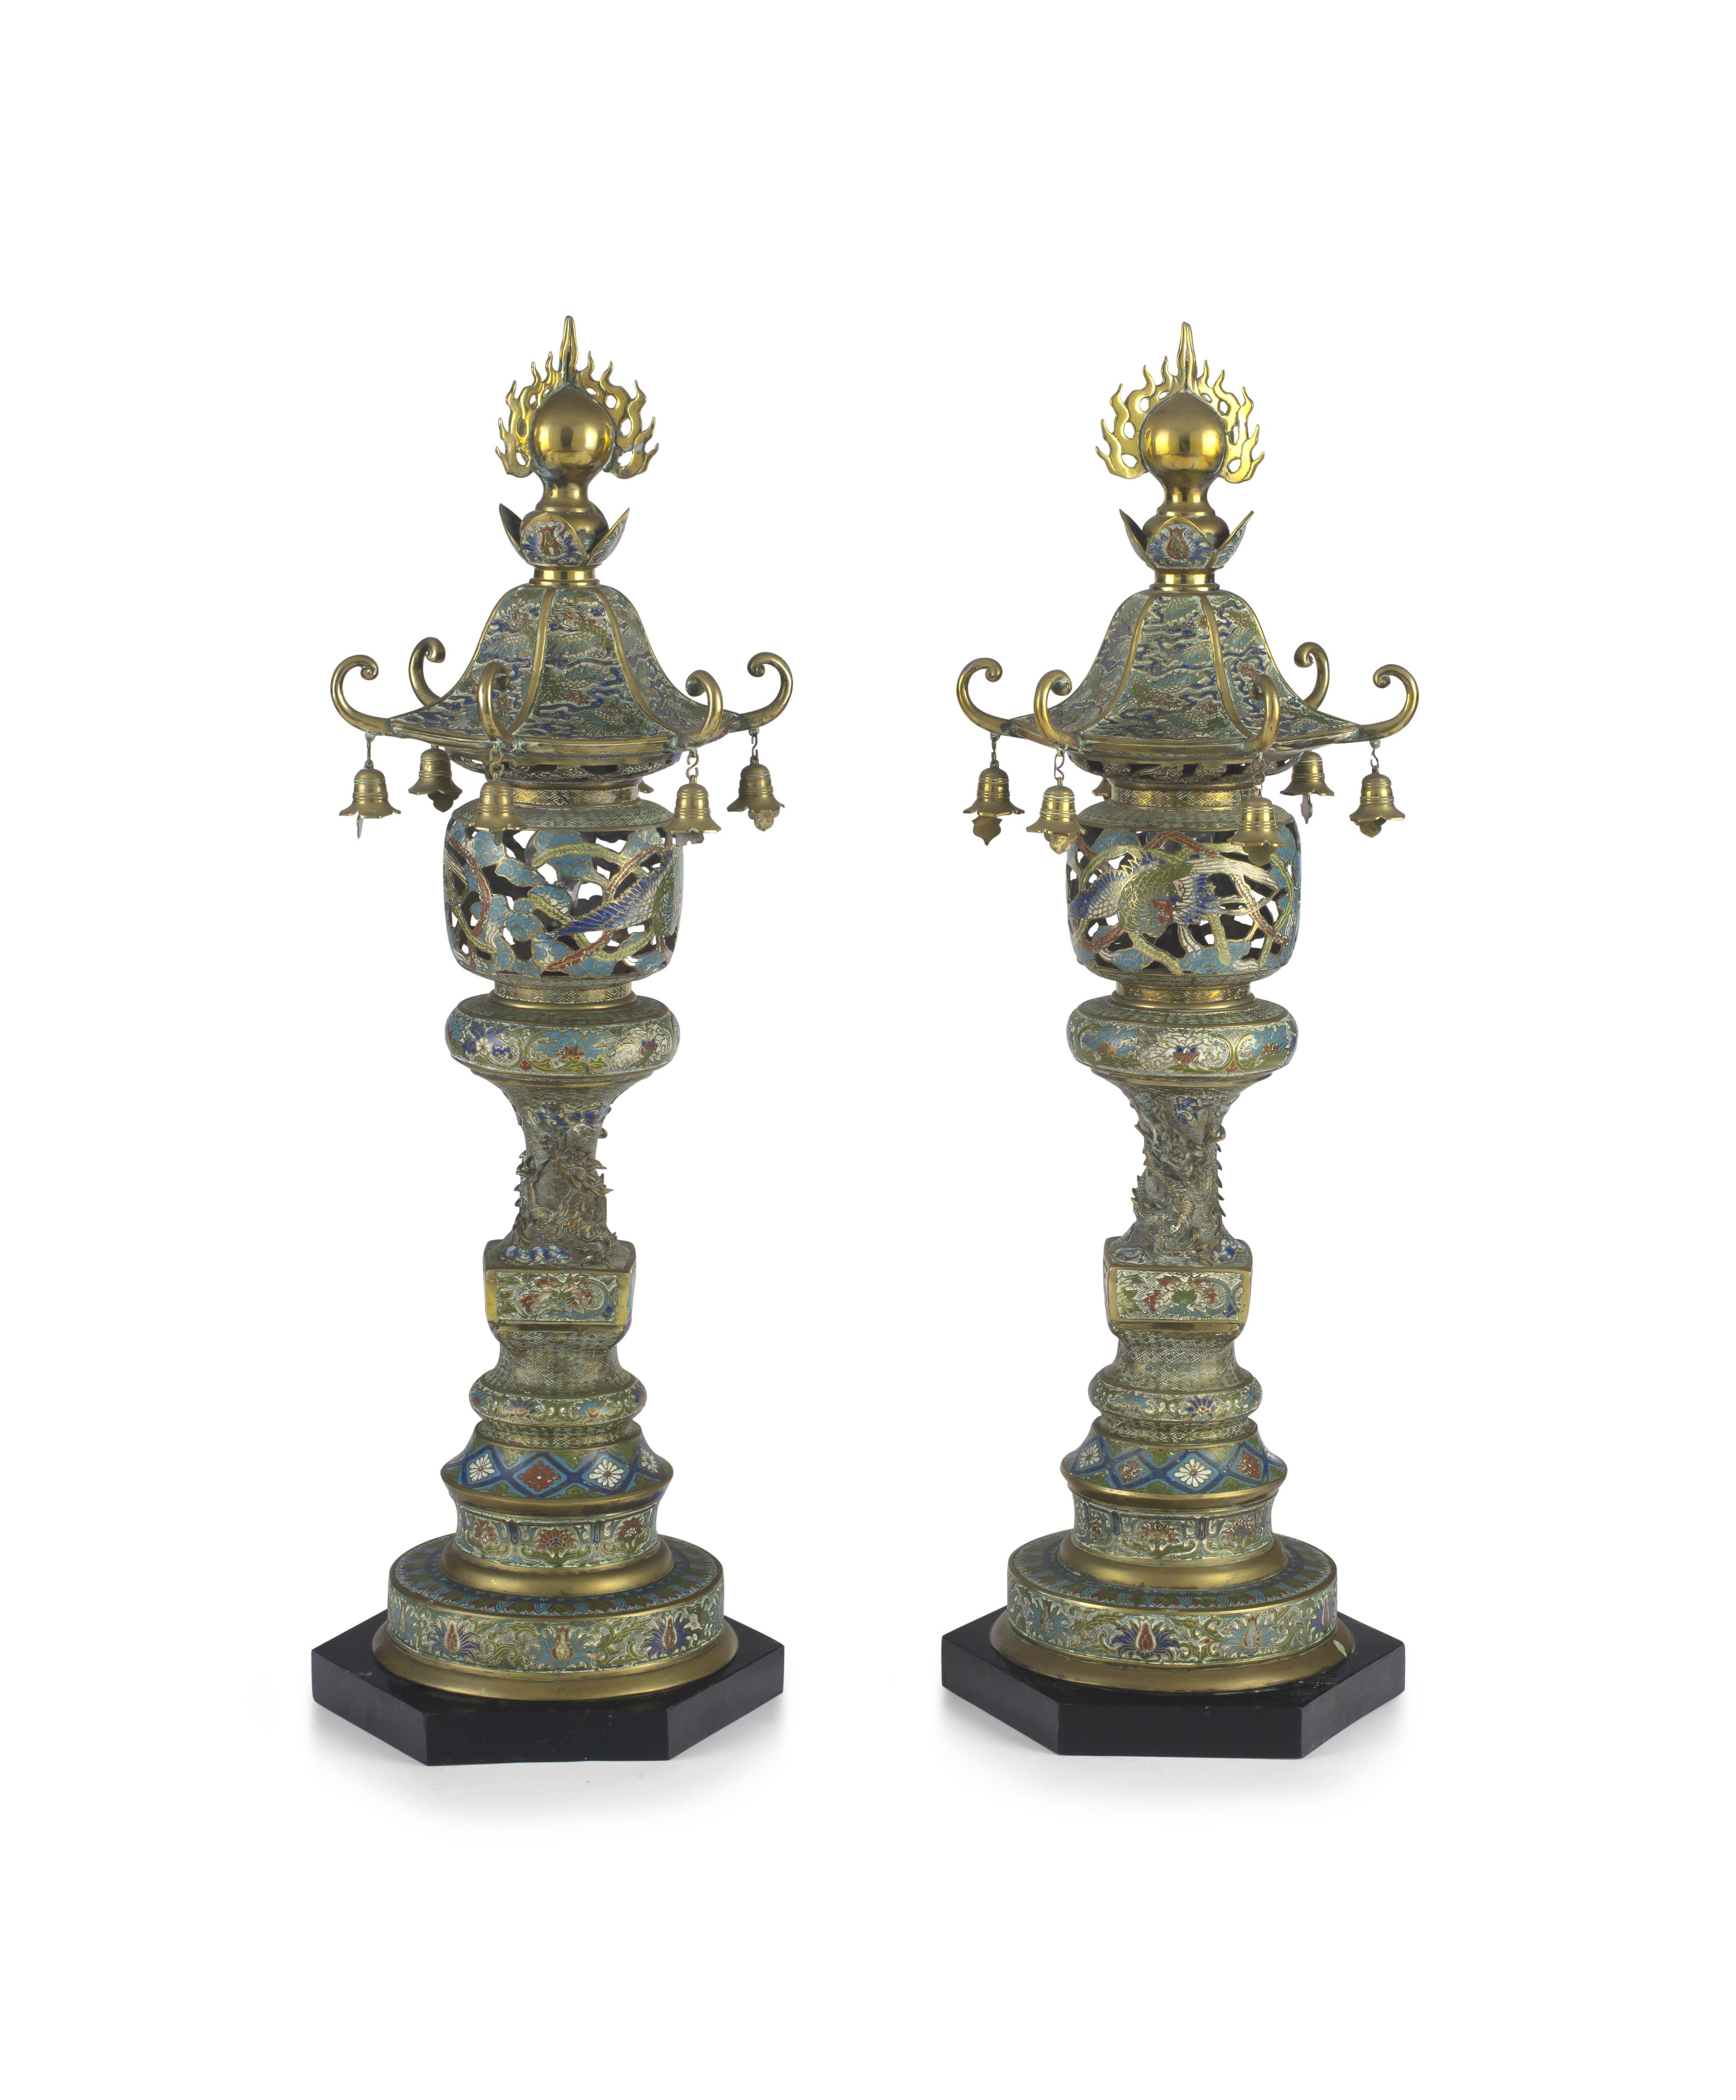 A pair of Chinese champlevé enamelled brass lanterns, late 19th century